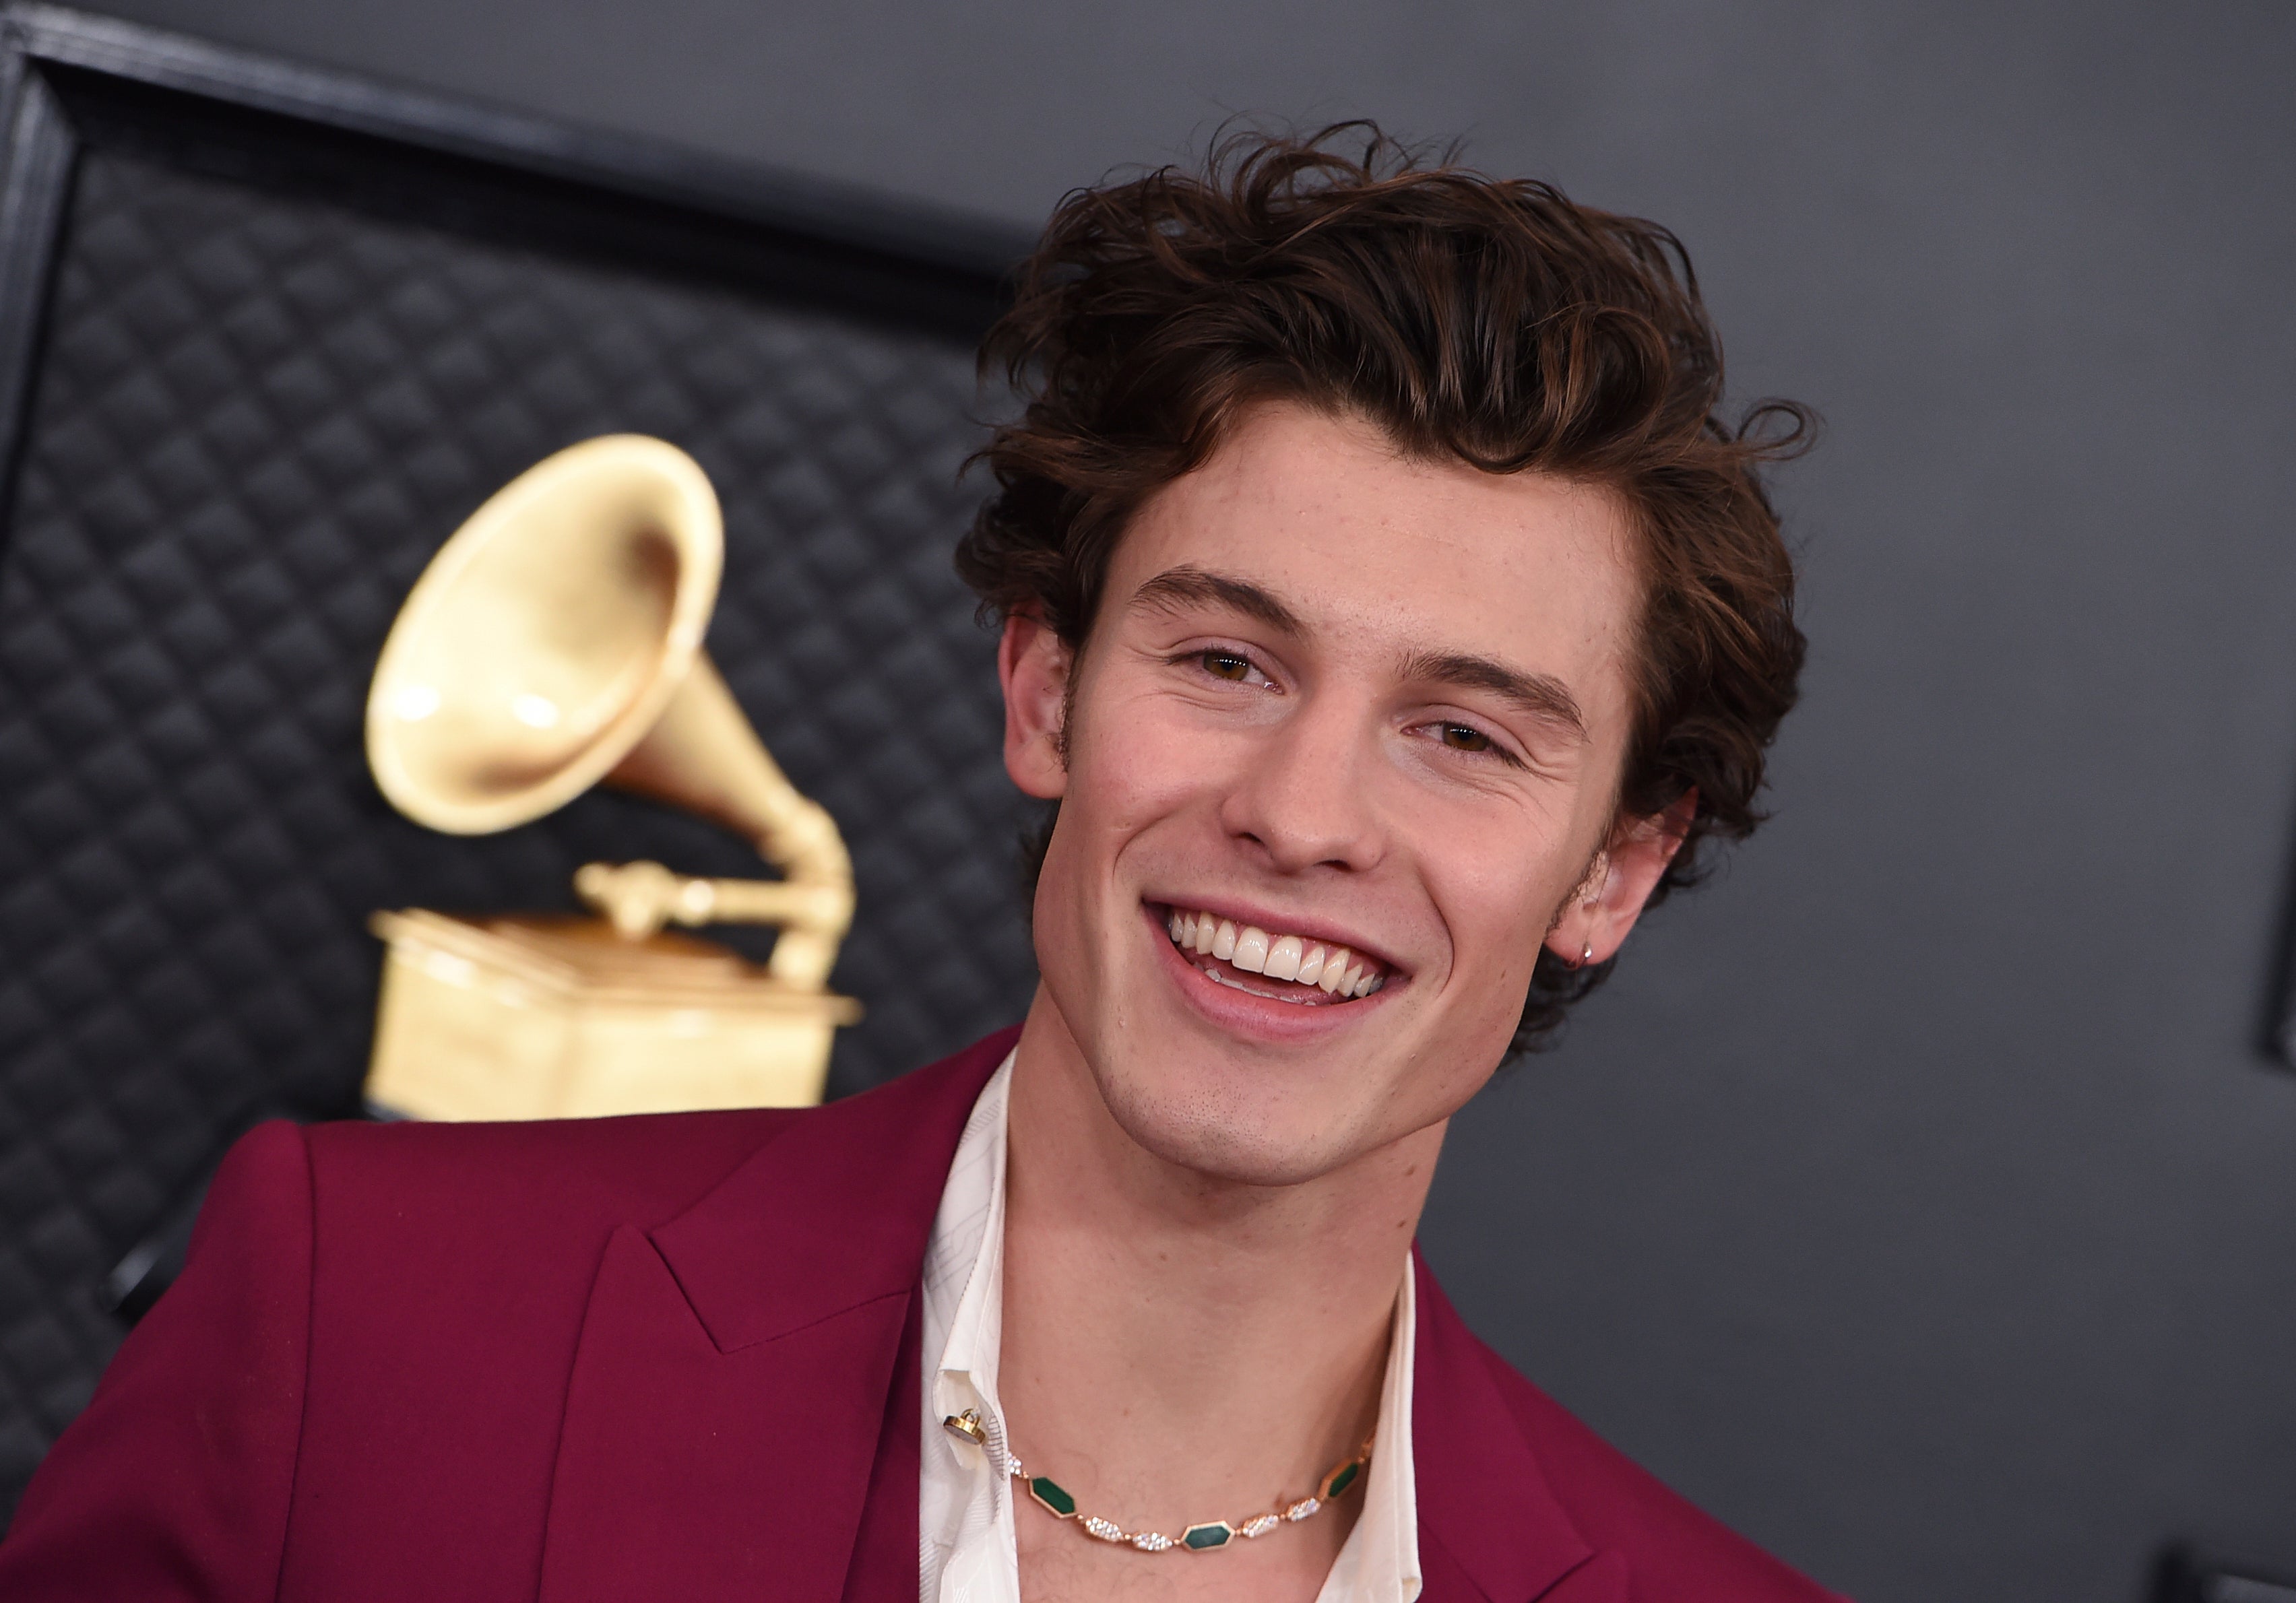 Shawn Mendes cancels world tour to prioritize his health | The